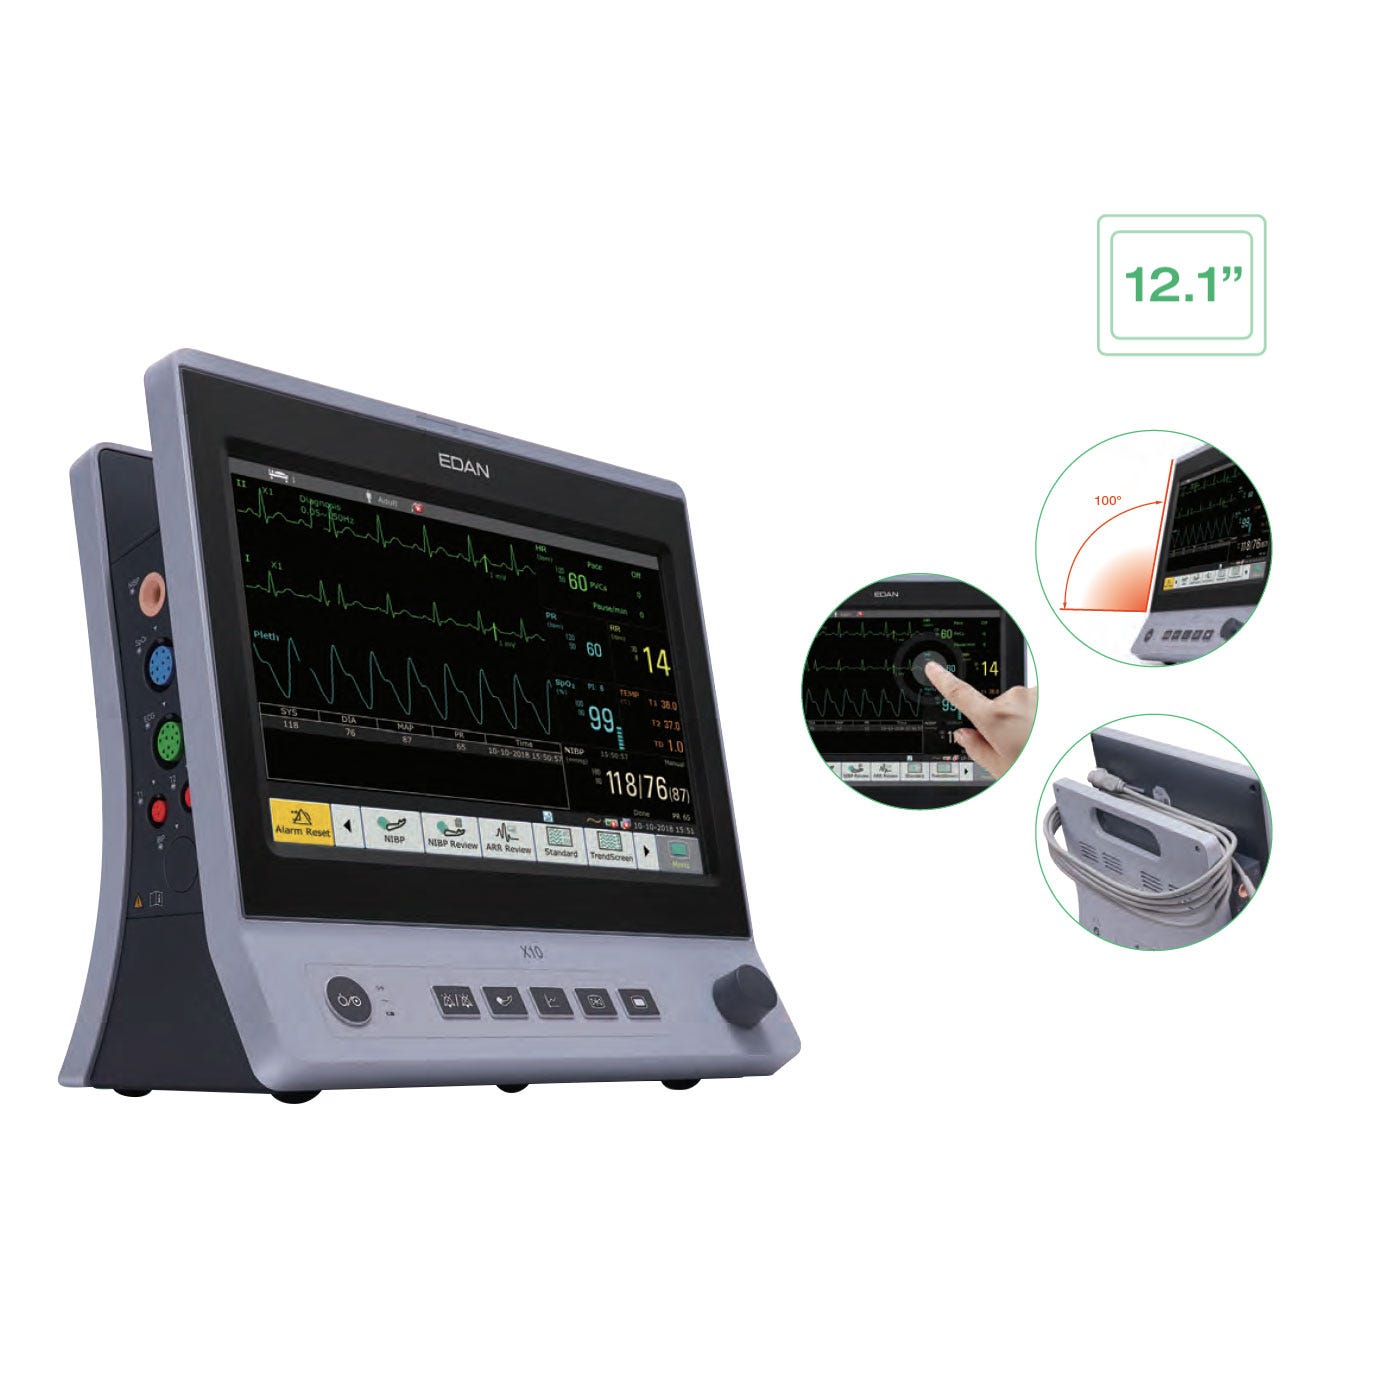 Patient Monitor with 12.1" Touch Screen, ECG, SPO2, NIBP, CO2, Respiratory Rate and Printer